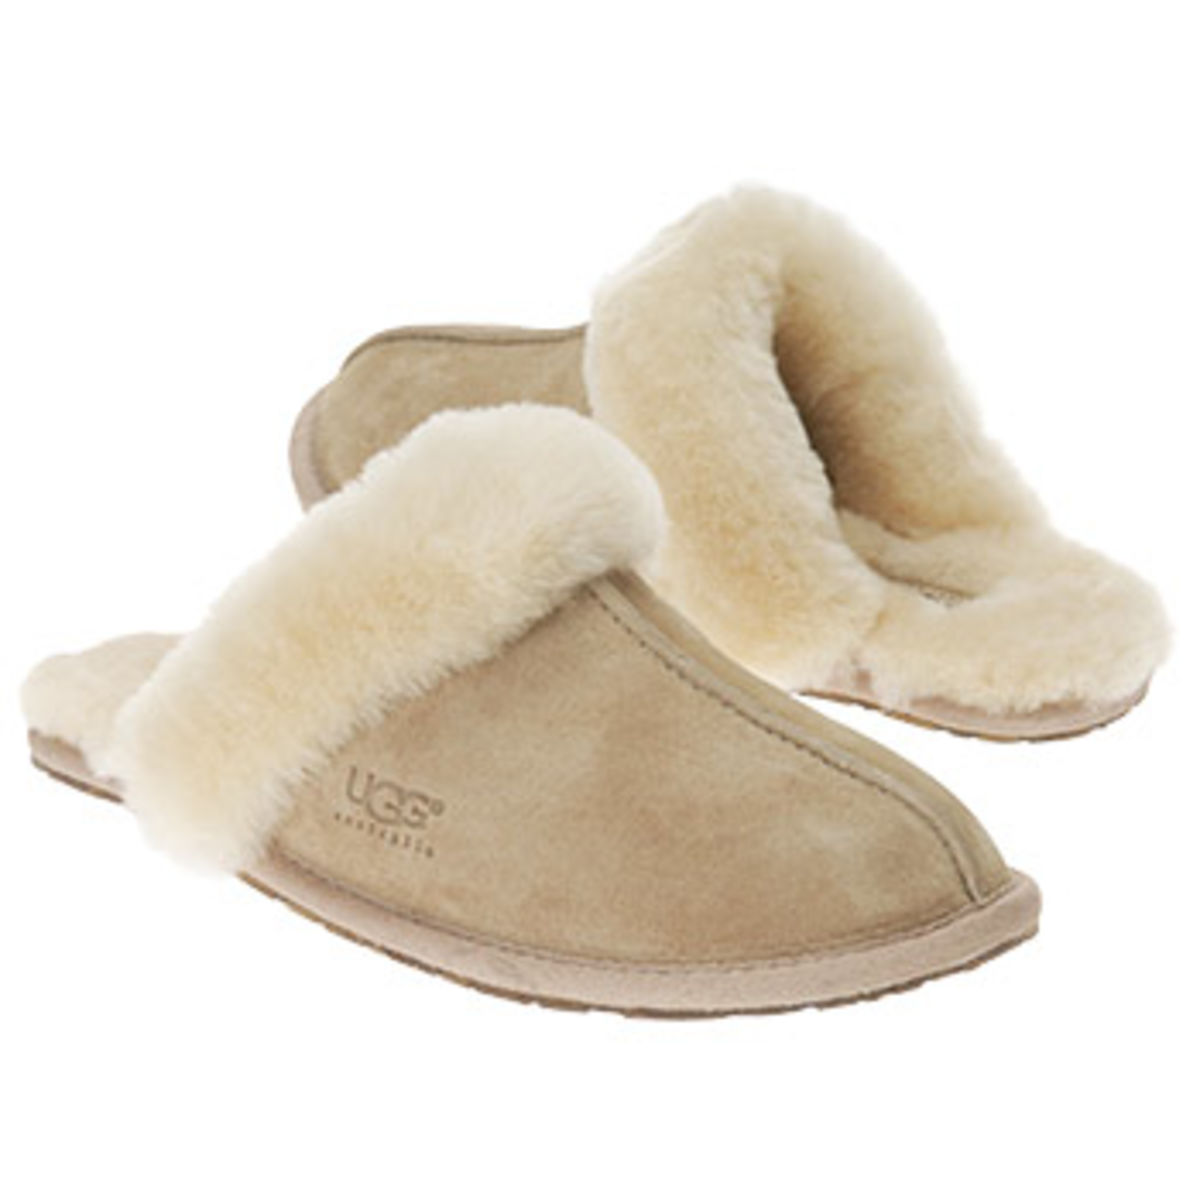 Best Inexpensive Genuine Ugg Slippers For Women On Sale - Reviews And Ratings | A Listly List